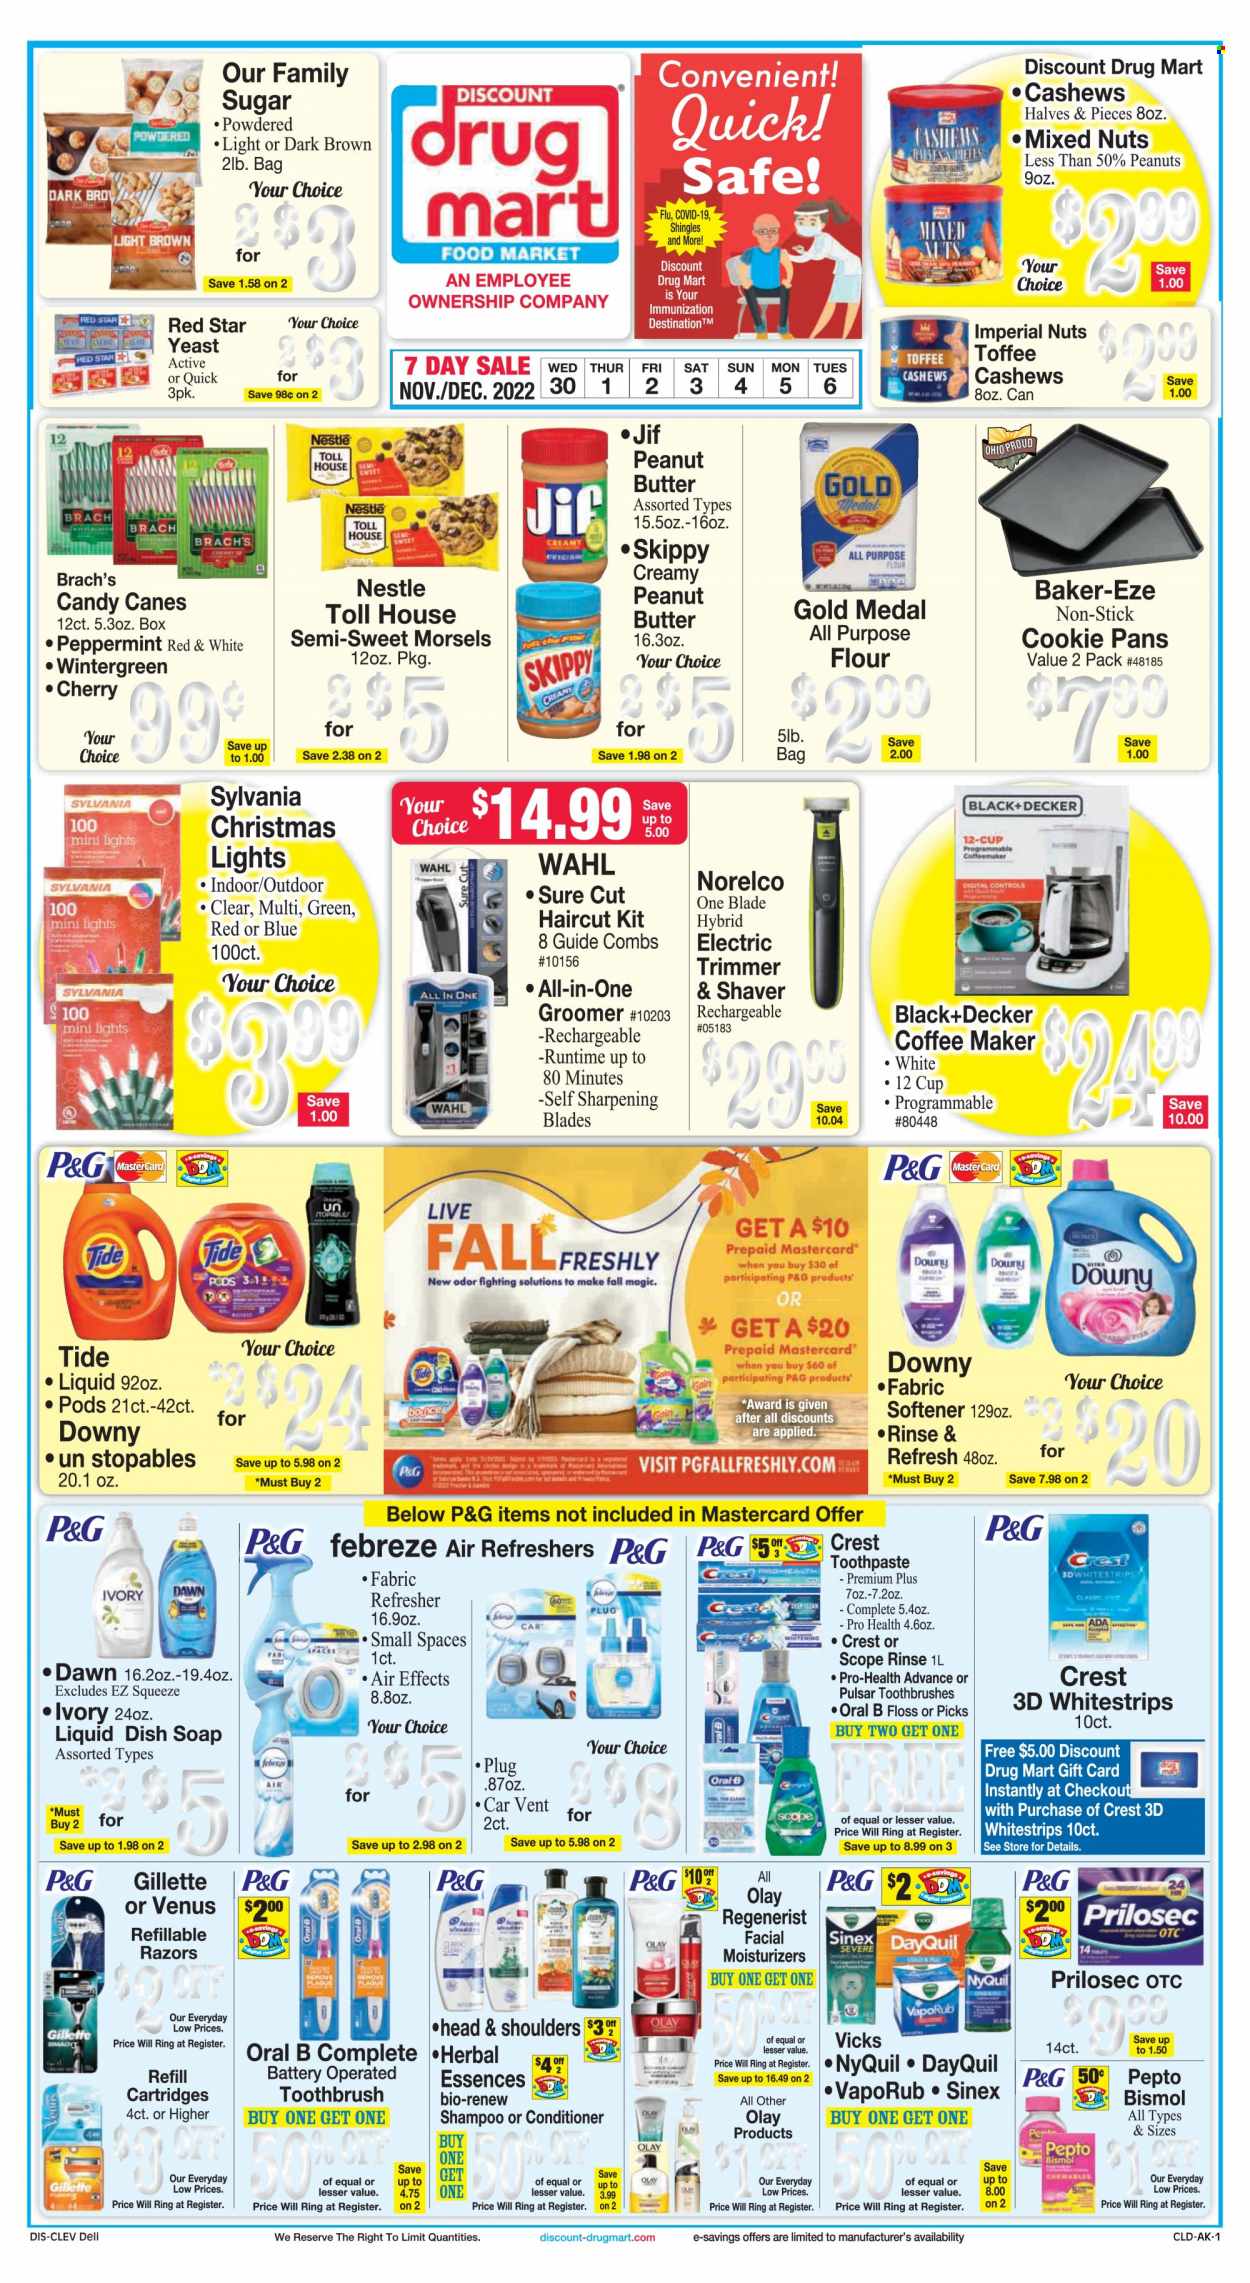 thumbnail - Discount Drug Mart Flyer - 11/30/2022 - 12/06/2022 - Sales products - cherries, yeast, Nestlé, toffee, all purpose flour, flour, sugar, peanut butter, Jif, cashews, peanuts, mixed nuts, Febreze, Gain, Tide, fabric softener, Downy Laundry, shampoo, soap, toothbrush, Oral-B, toothpaste, Crest, moisturizer, Olay, conditioner, refresher, Head & Shoulders, Herbal Essences, Sure, Gillette, Venus, shaver, Vicks, trimmer, Sylvania, Norelco, haircut kit, DayQuil, NyQuil, VapoRub, Sinex. Page 1.